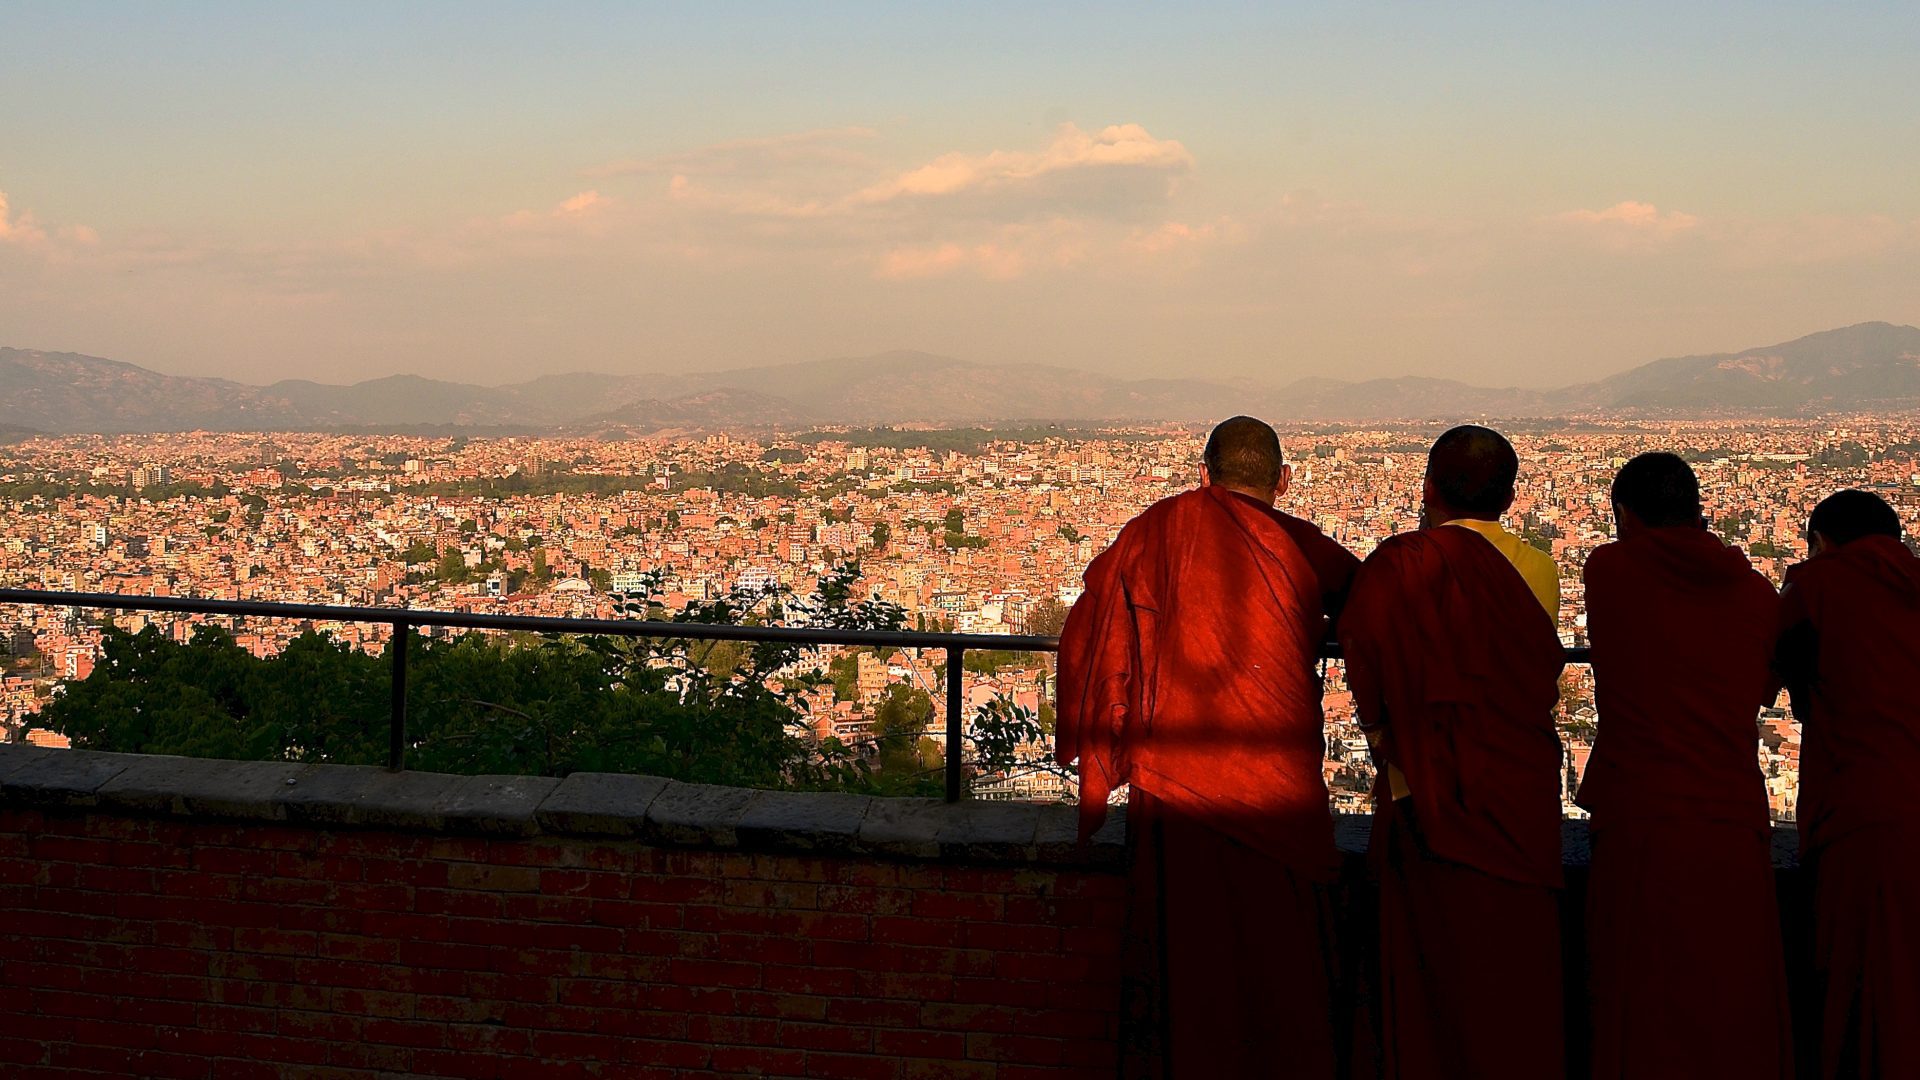 Tibetan monks looking out across the scenery